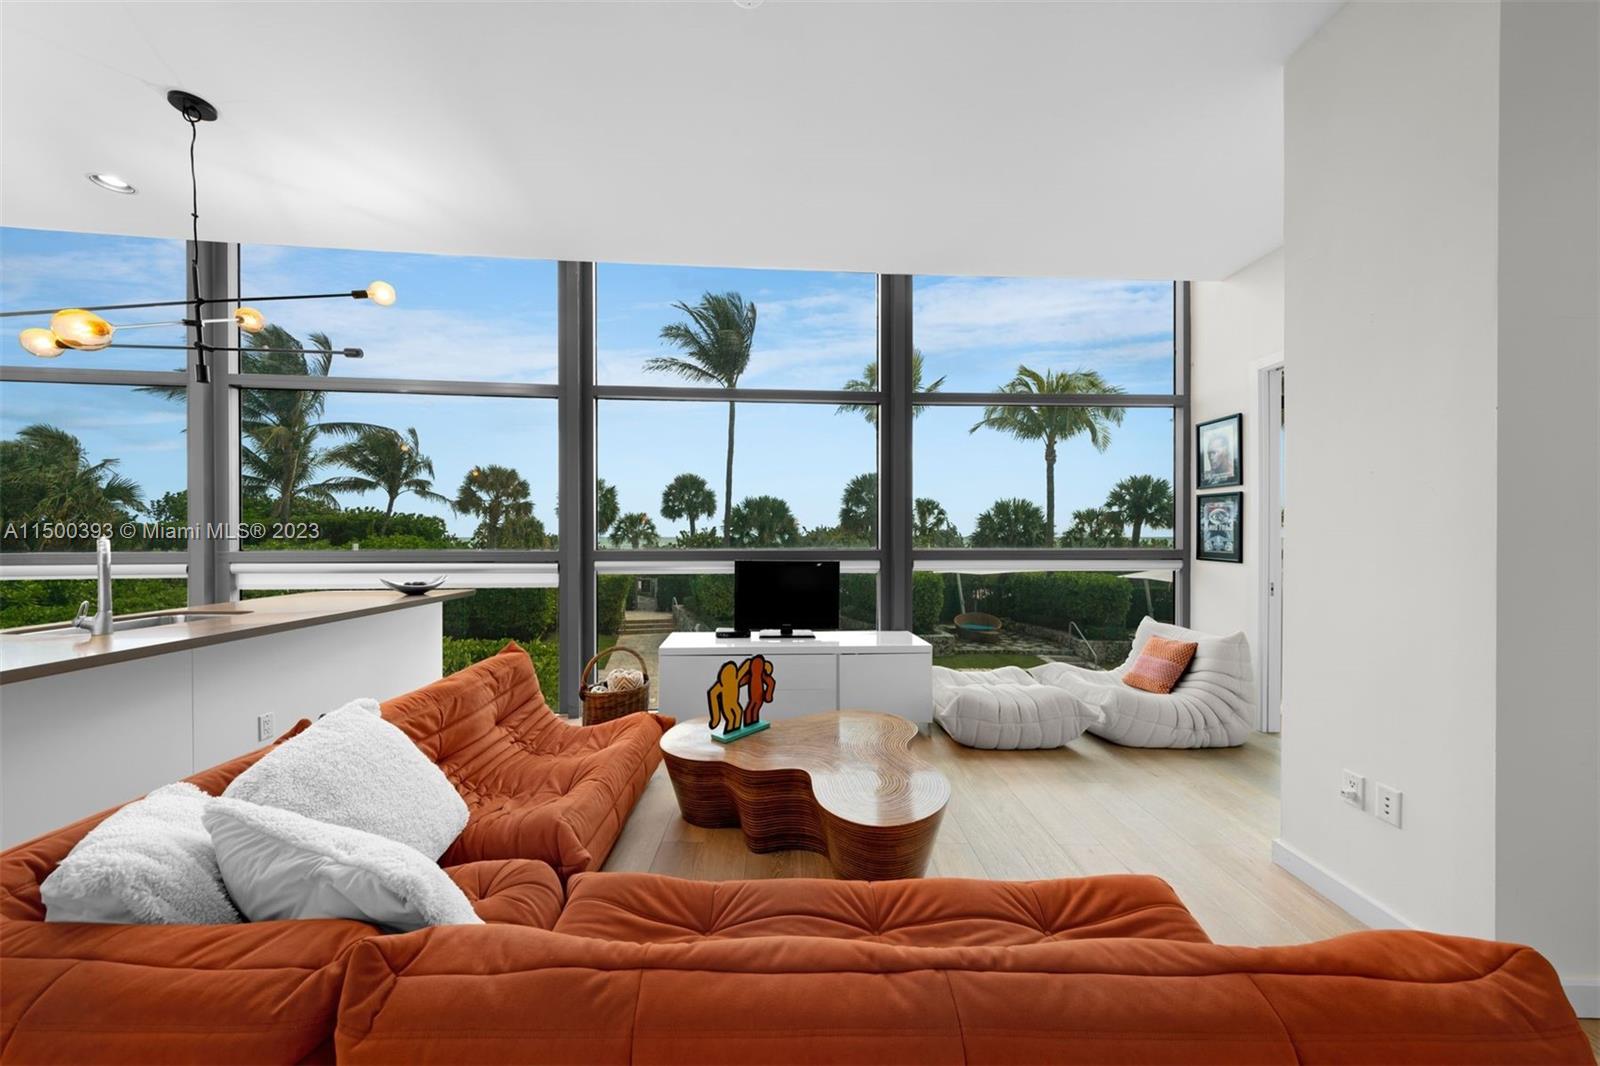 This stunning 1 Bed, 1.5 Bath unit offers floor to ceiling windows, an updated kitchen, hardwood floors, direct ocean views and a small sized den that could be used as an office. The MEi is a boutique condominium with 134 residences, offering 5-star service, valet parking, beach access + service, a state-of-the-art pool, fitness center, library, steam room, spa, and more. Available January 1st, 2024.